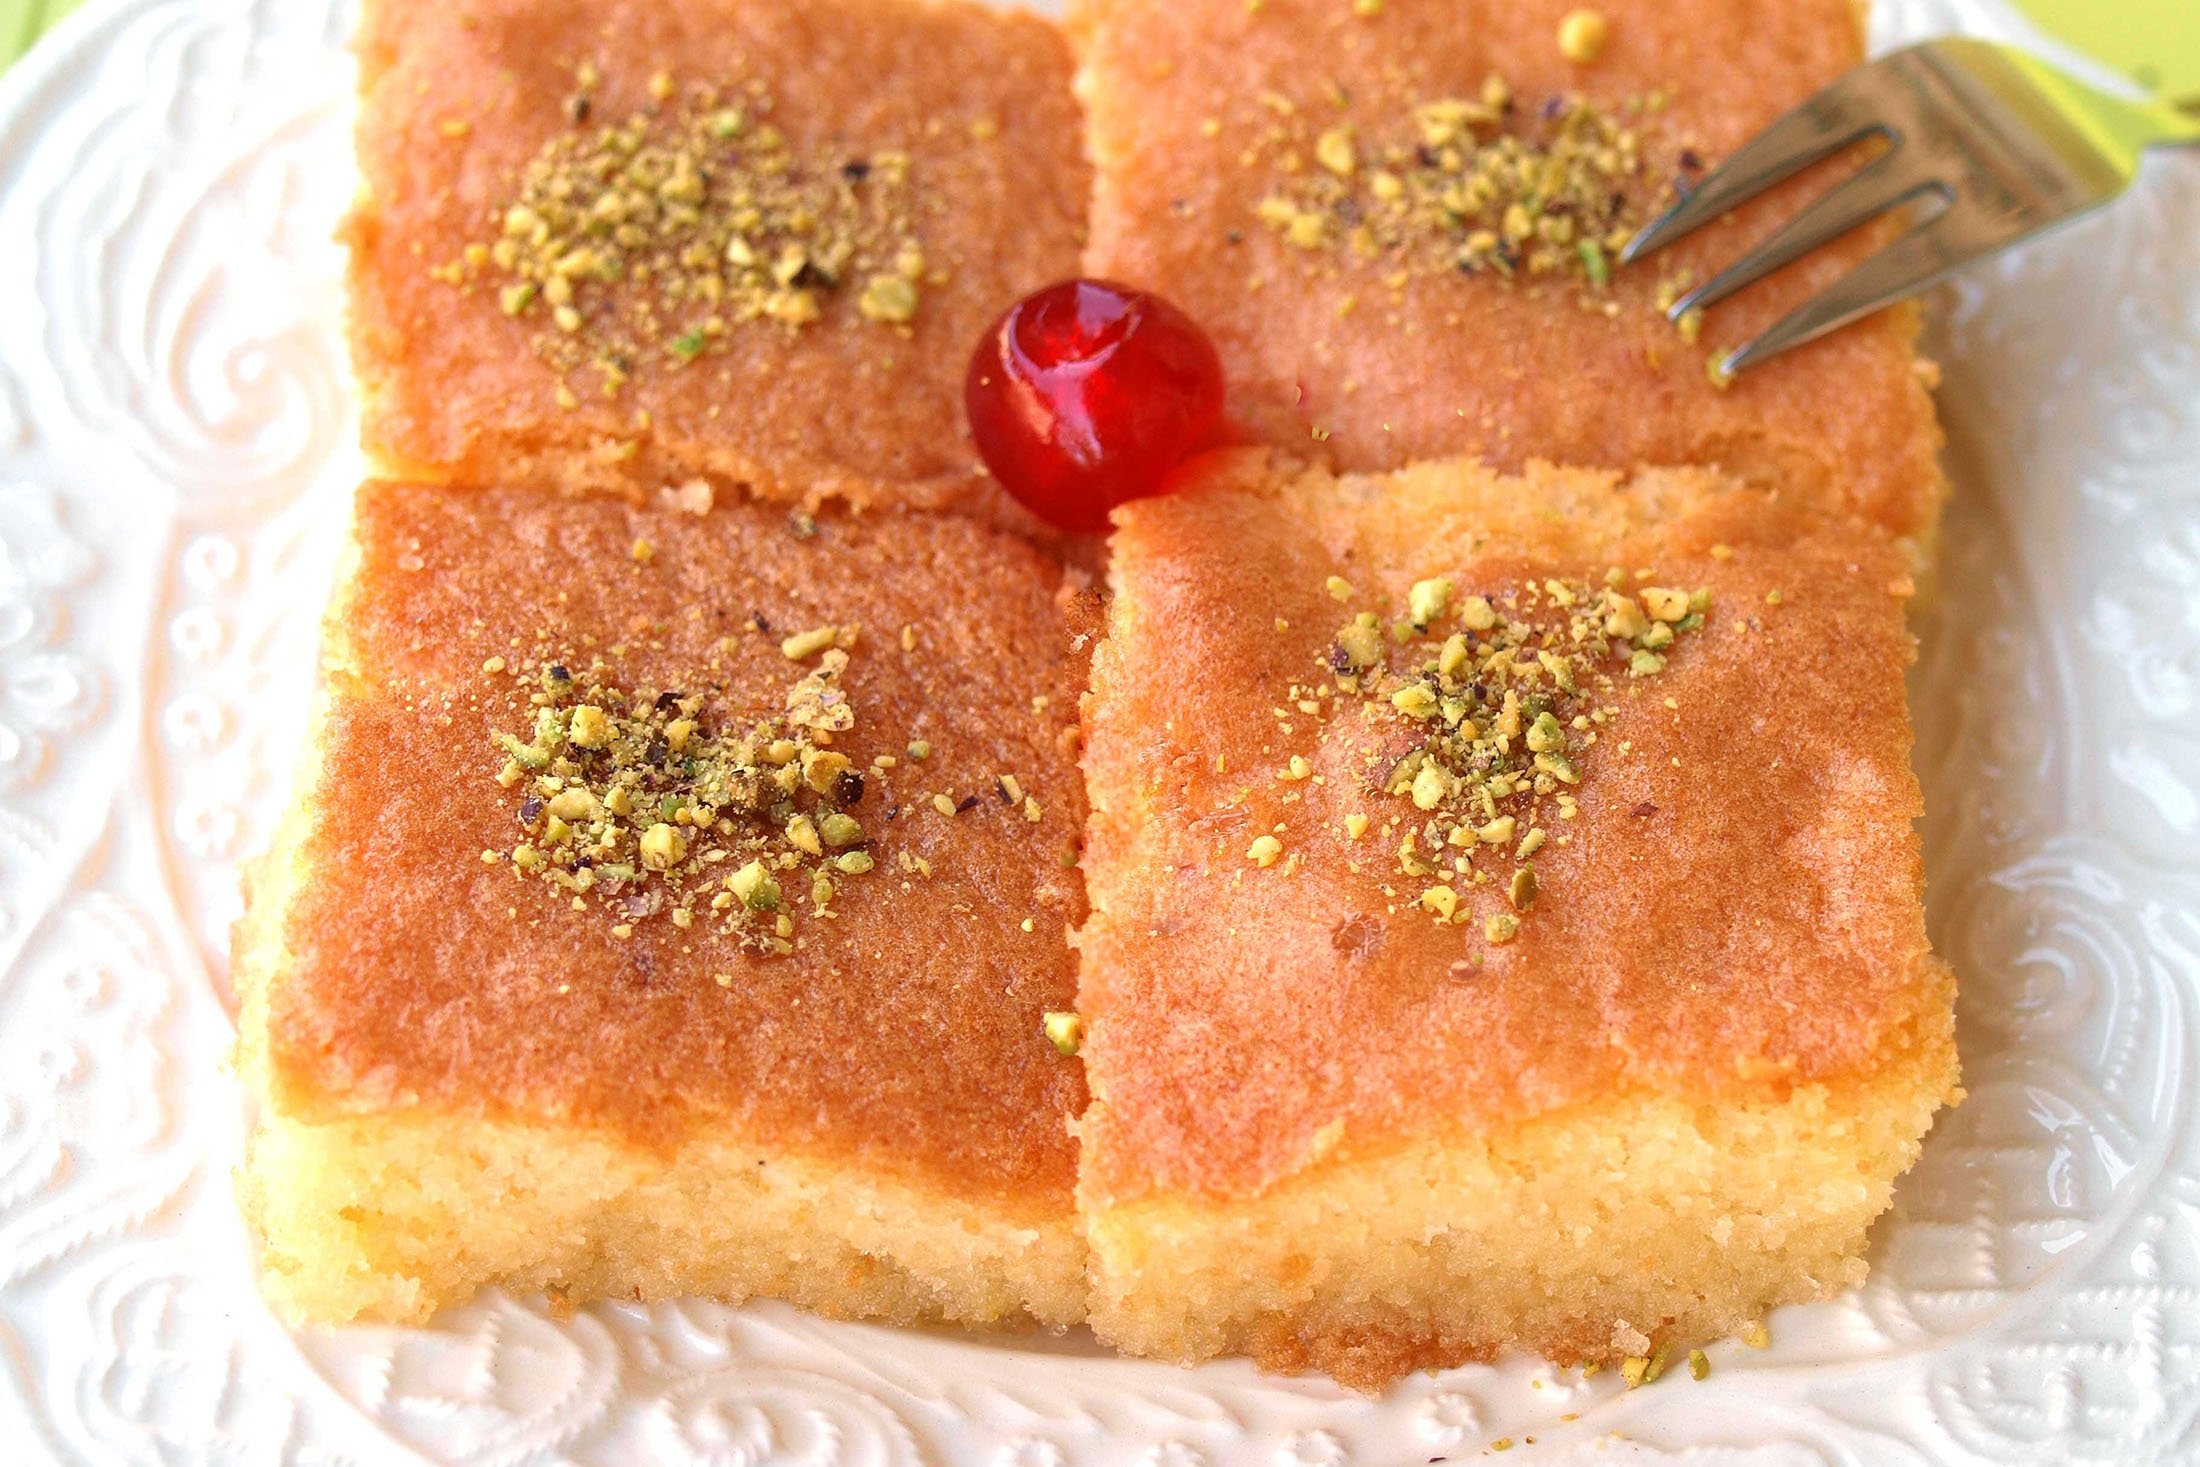 Four pieces of traditional Turkish sweet semolina cake called revani. (Shutterstock Photo)